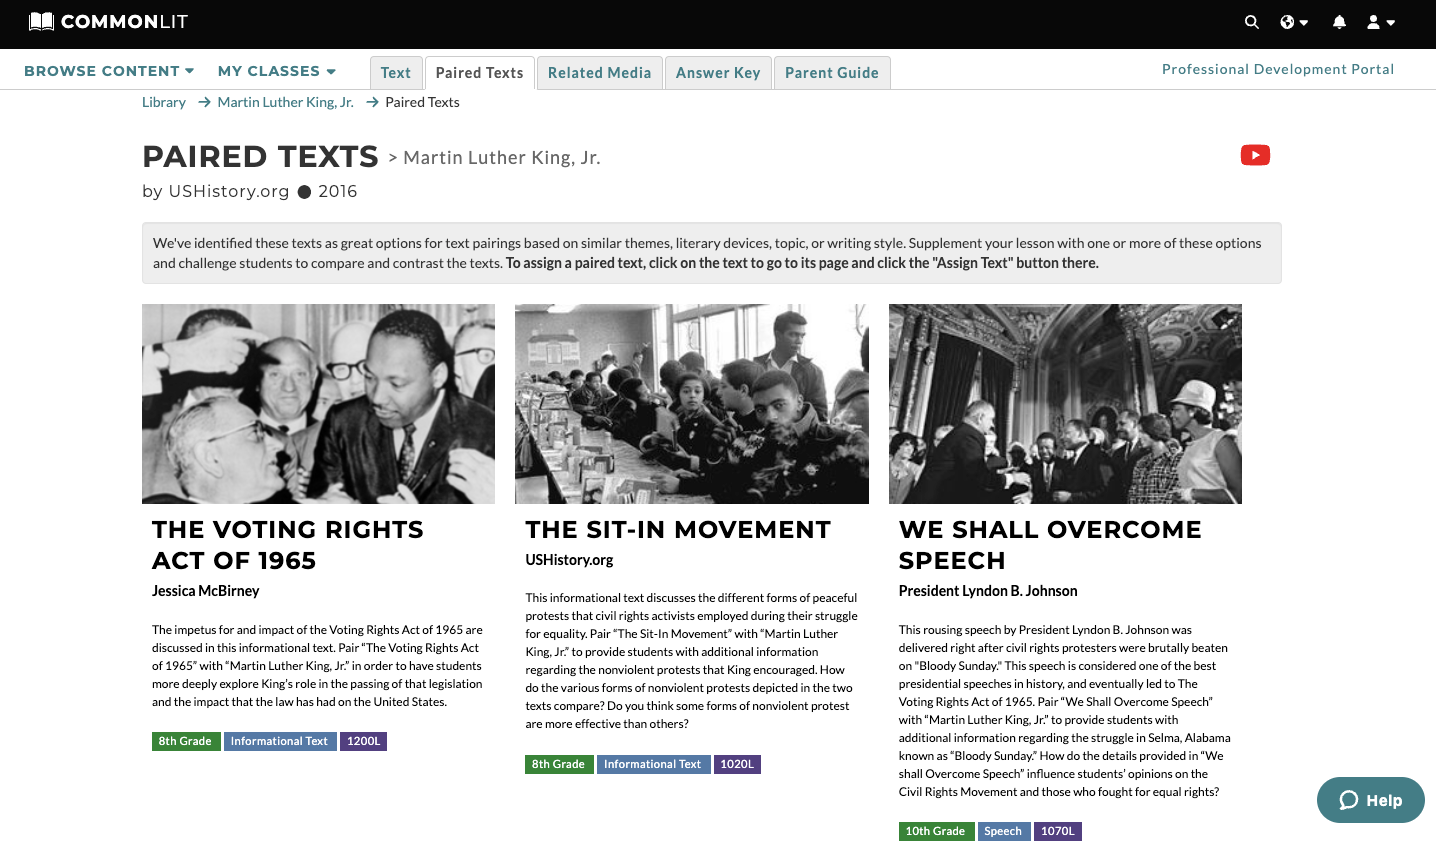 A screenshot of the Pair Texts tab for "Martin Luther King, Jr."